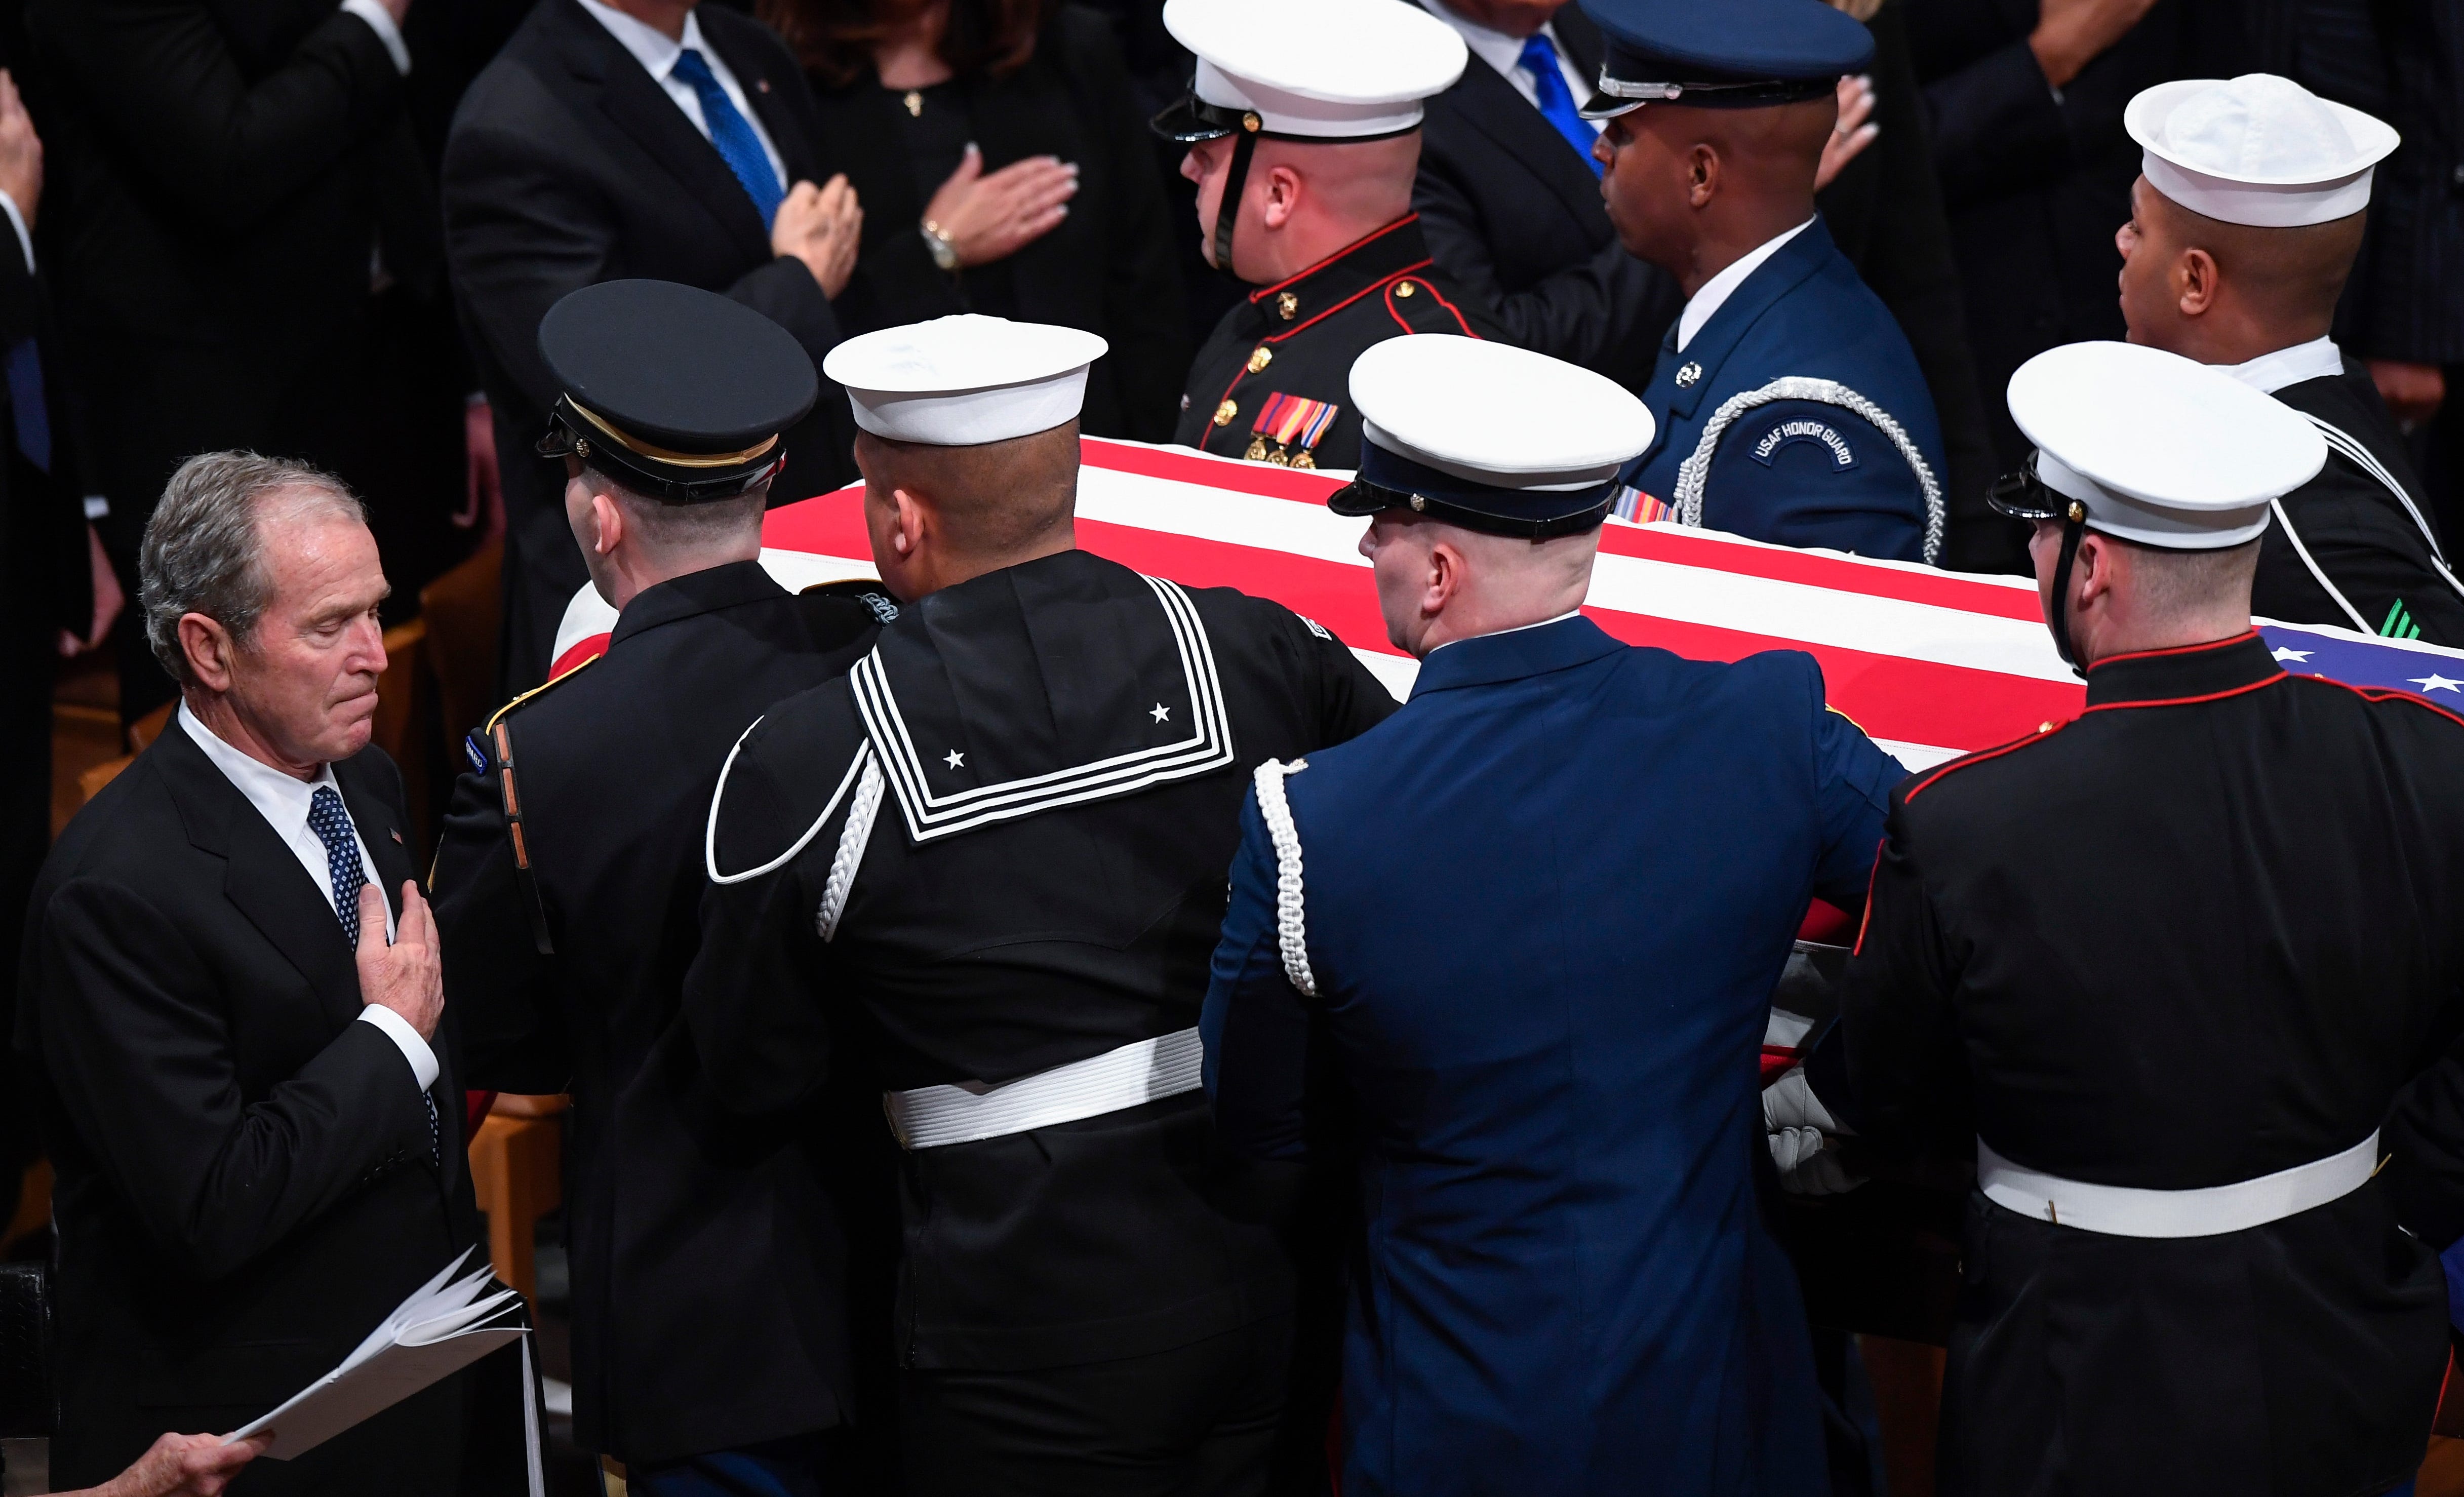 George H.W. Bush funeral: The most powerful photos from the